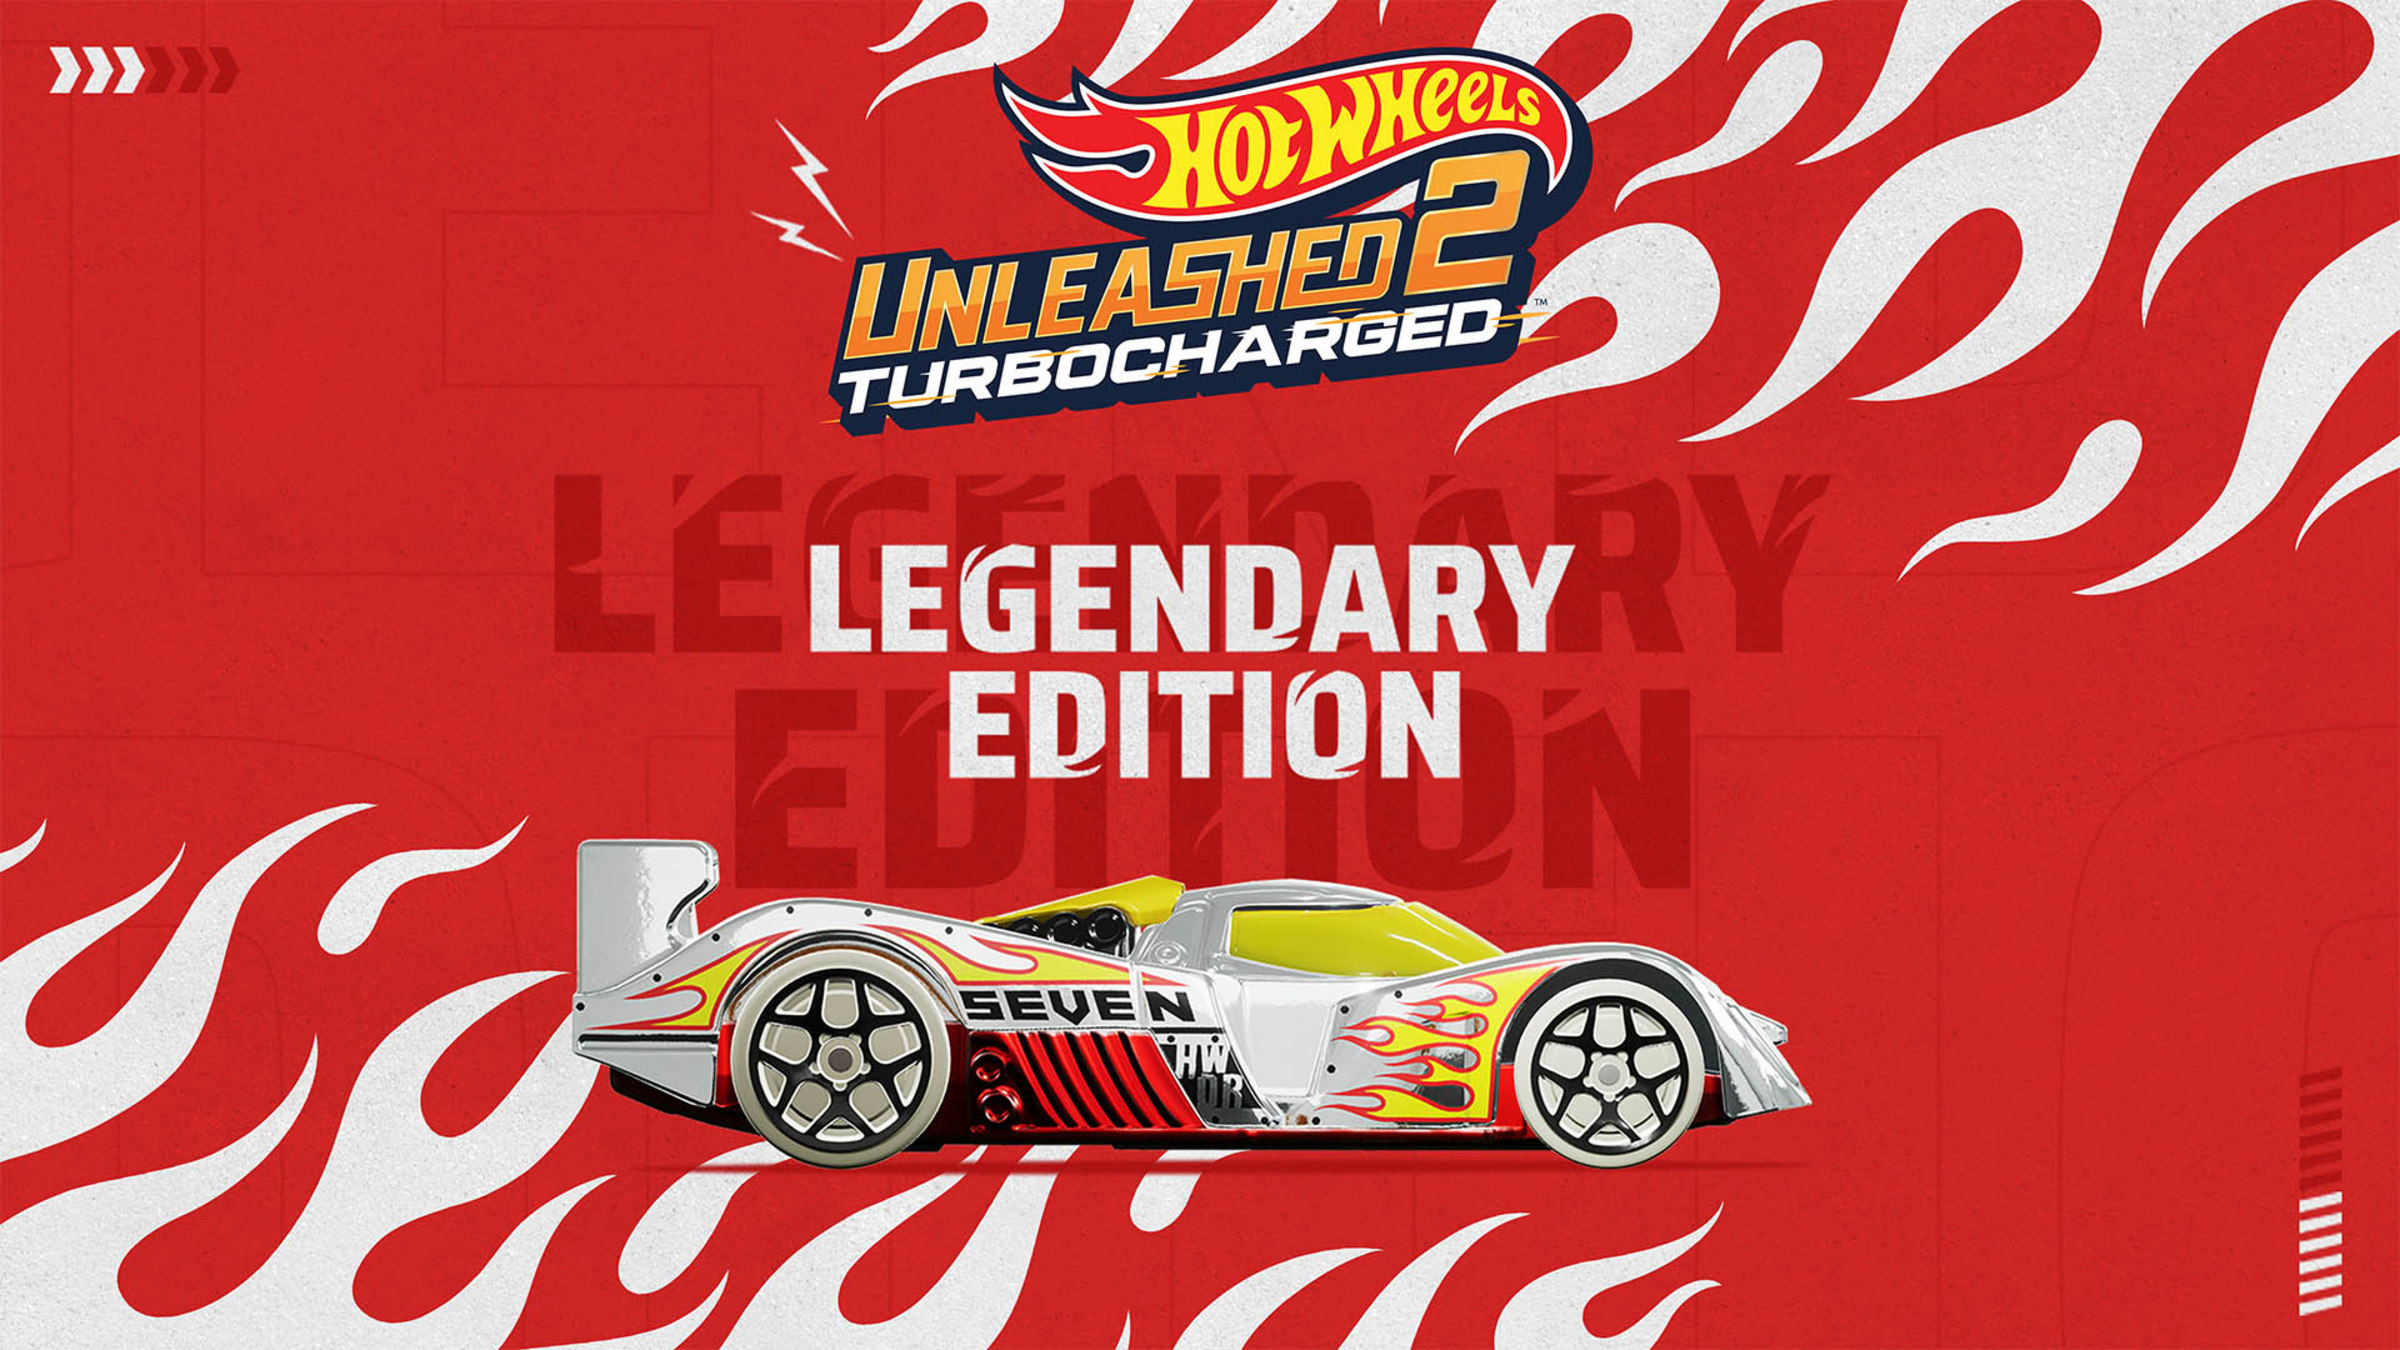 Hot Wheels Unleashed Challenge Accepted Edition for Nintendo Switch